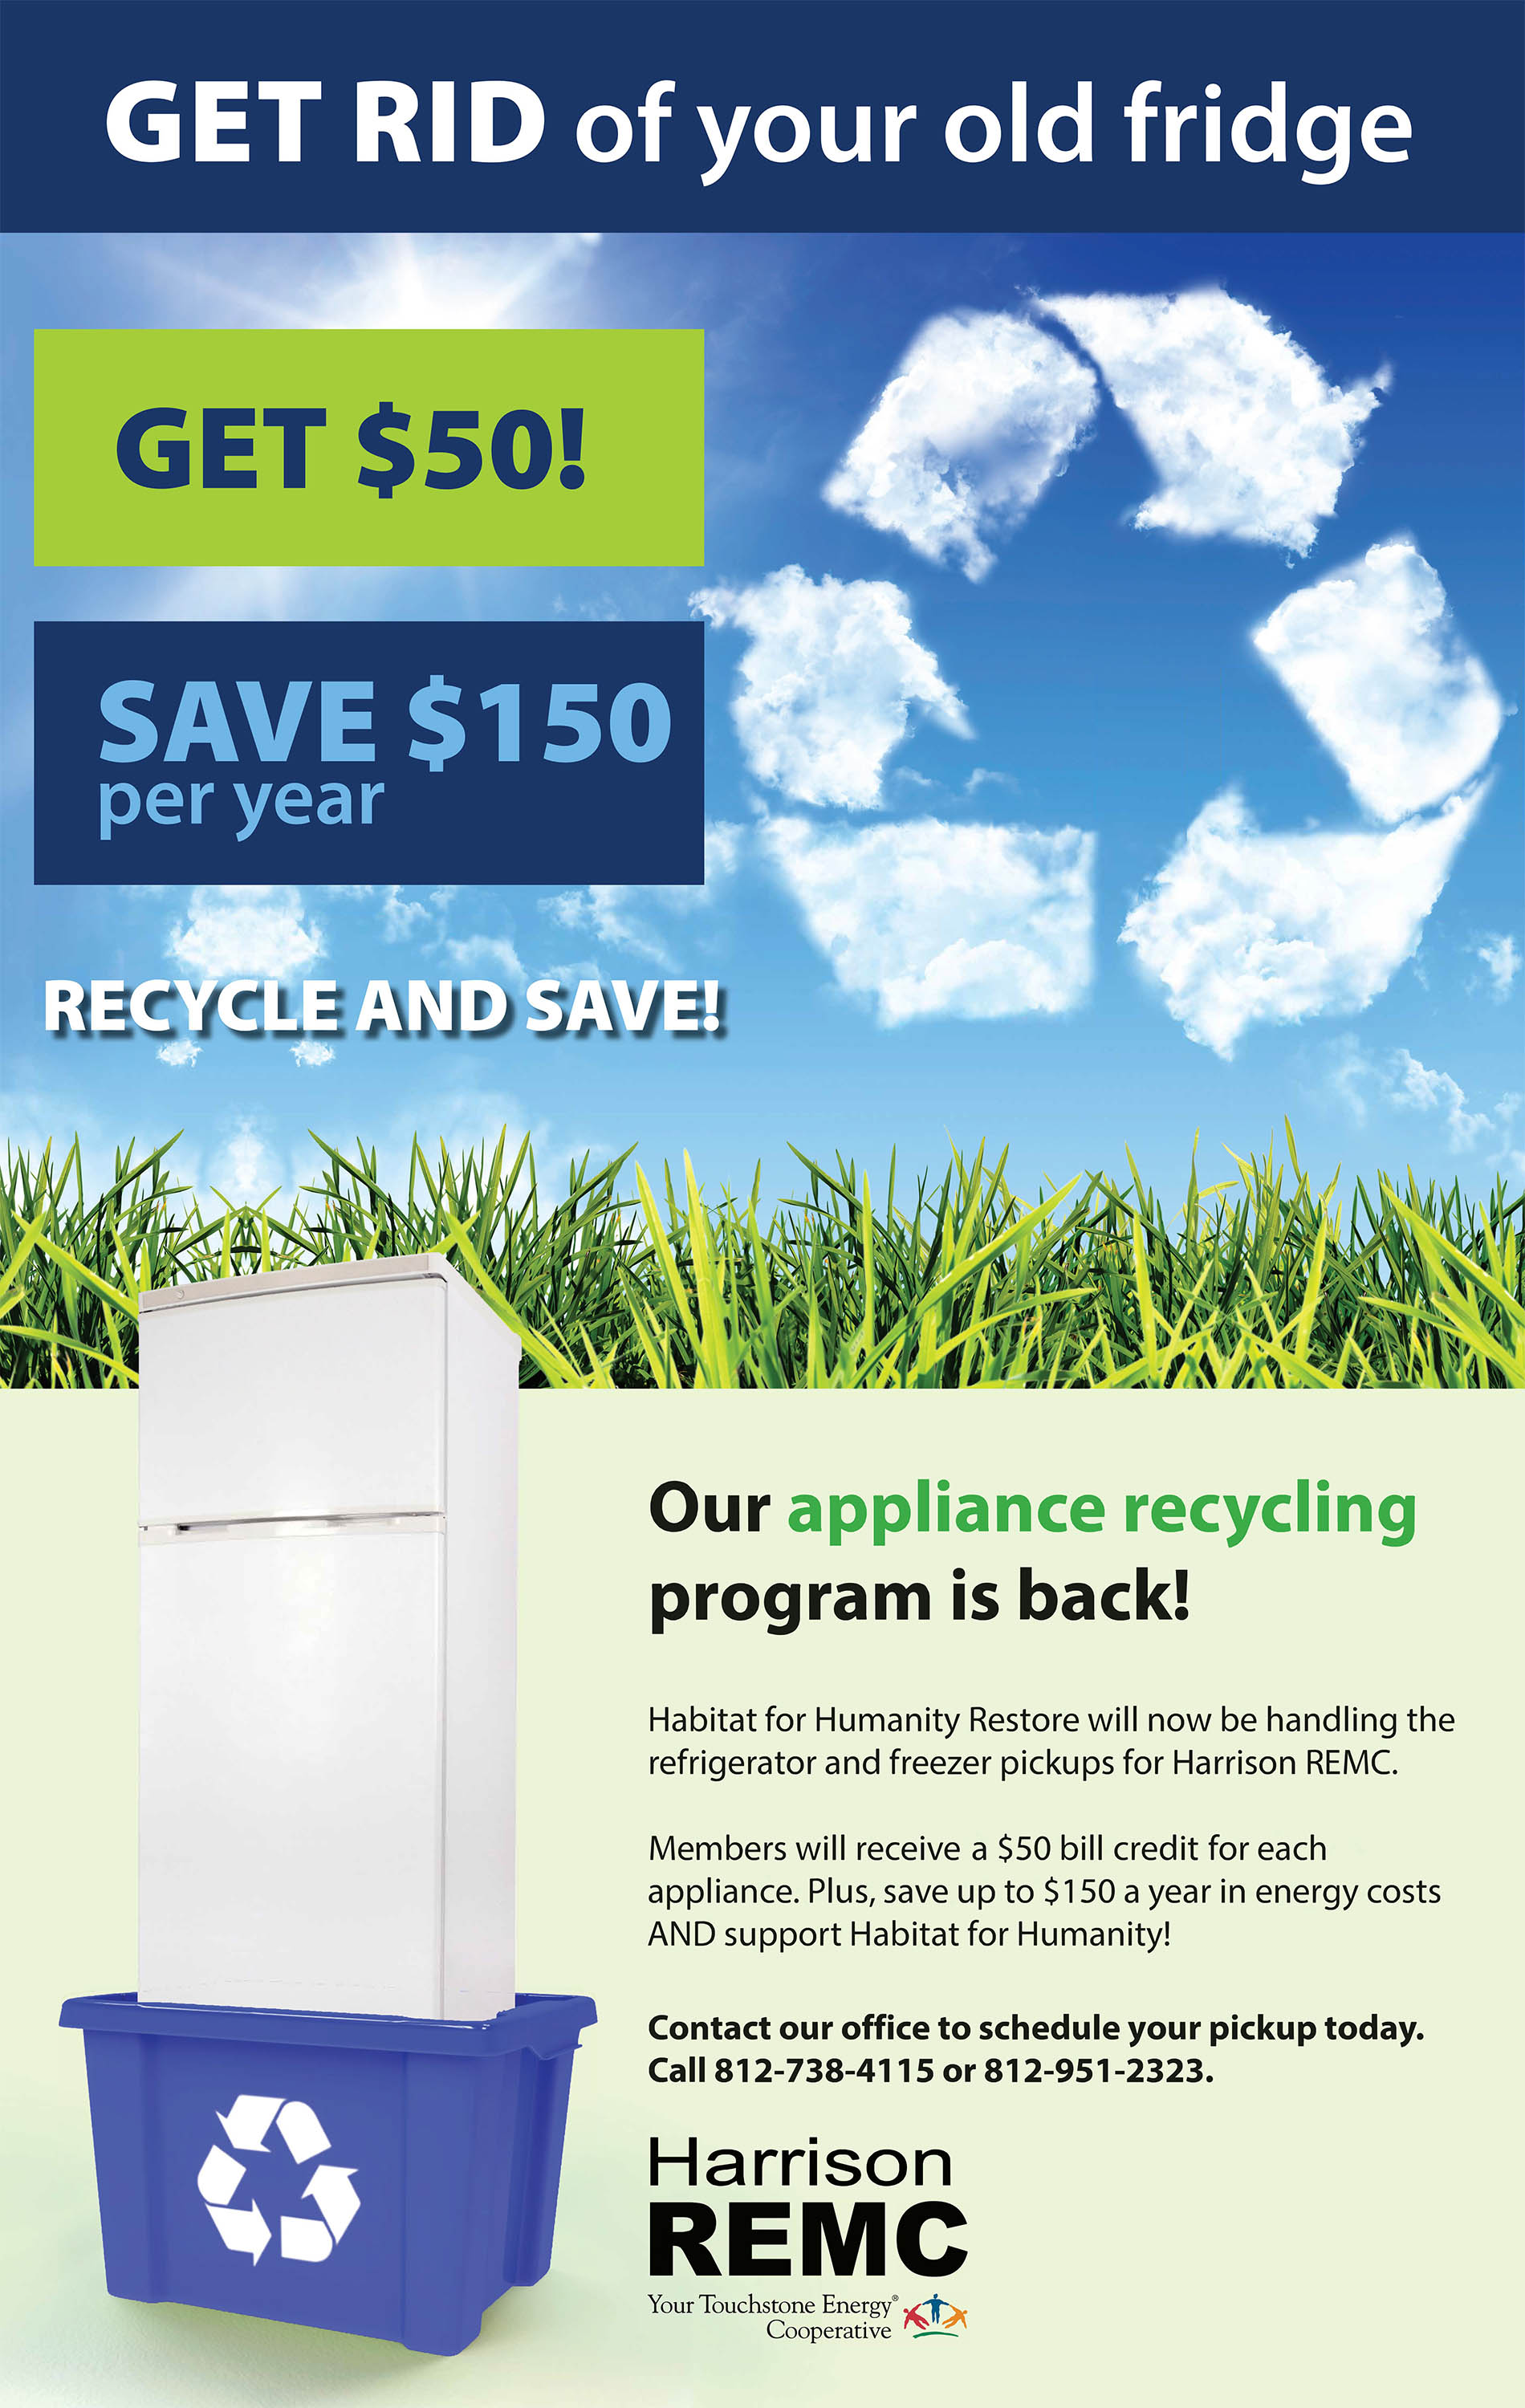 recycling-at-harrison-remc-indiana-connection